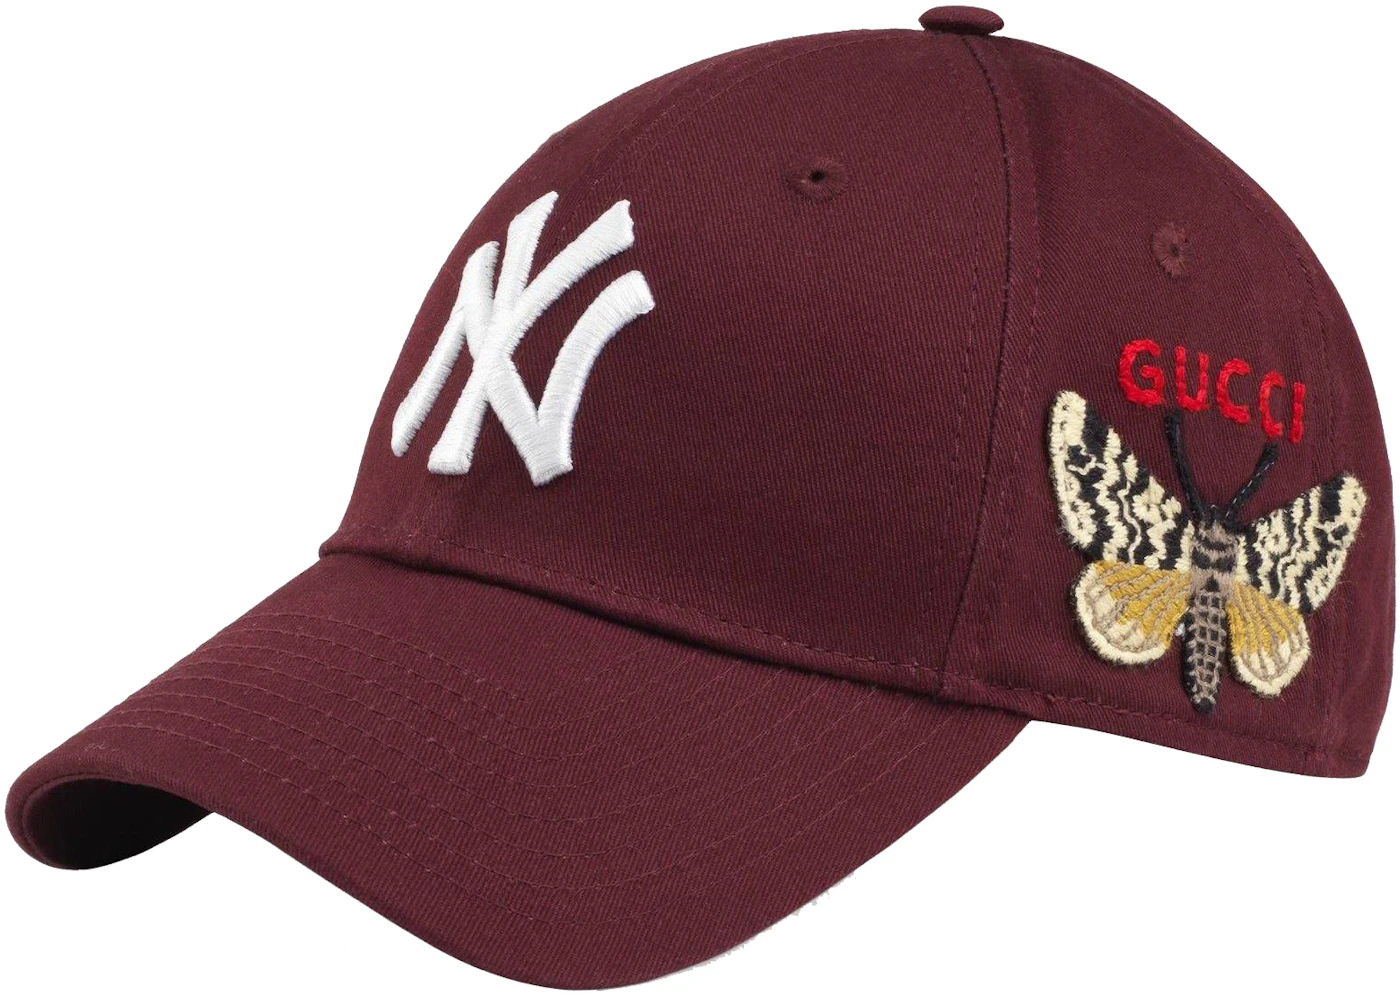 Gucci NY Yankees Embroidered Butterfly Baseball Cap Burgundy Men's - SS20 -  US